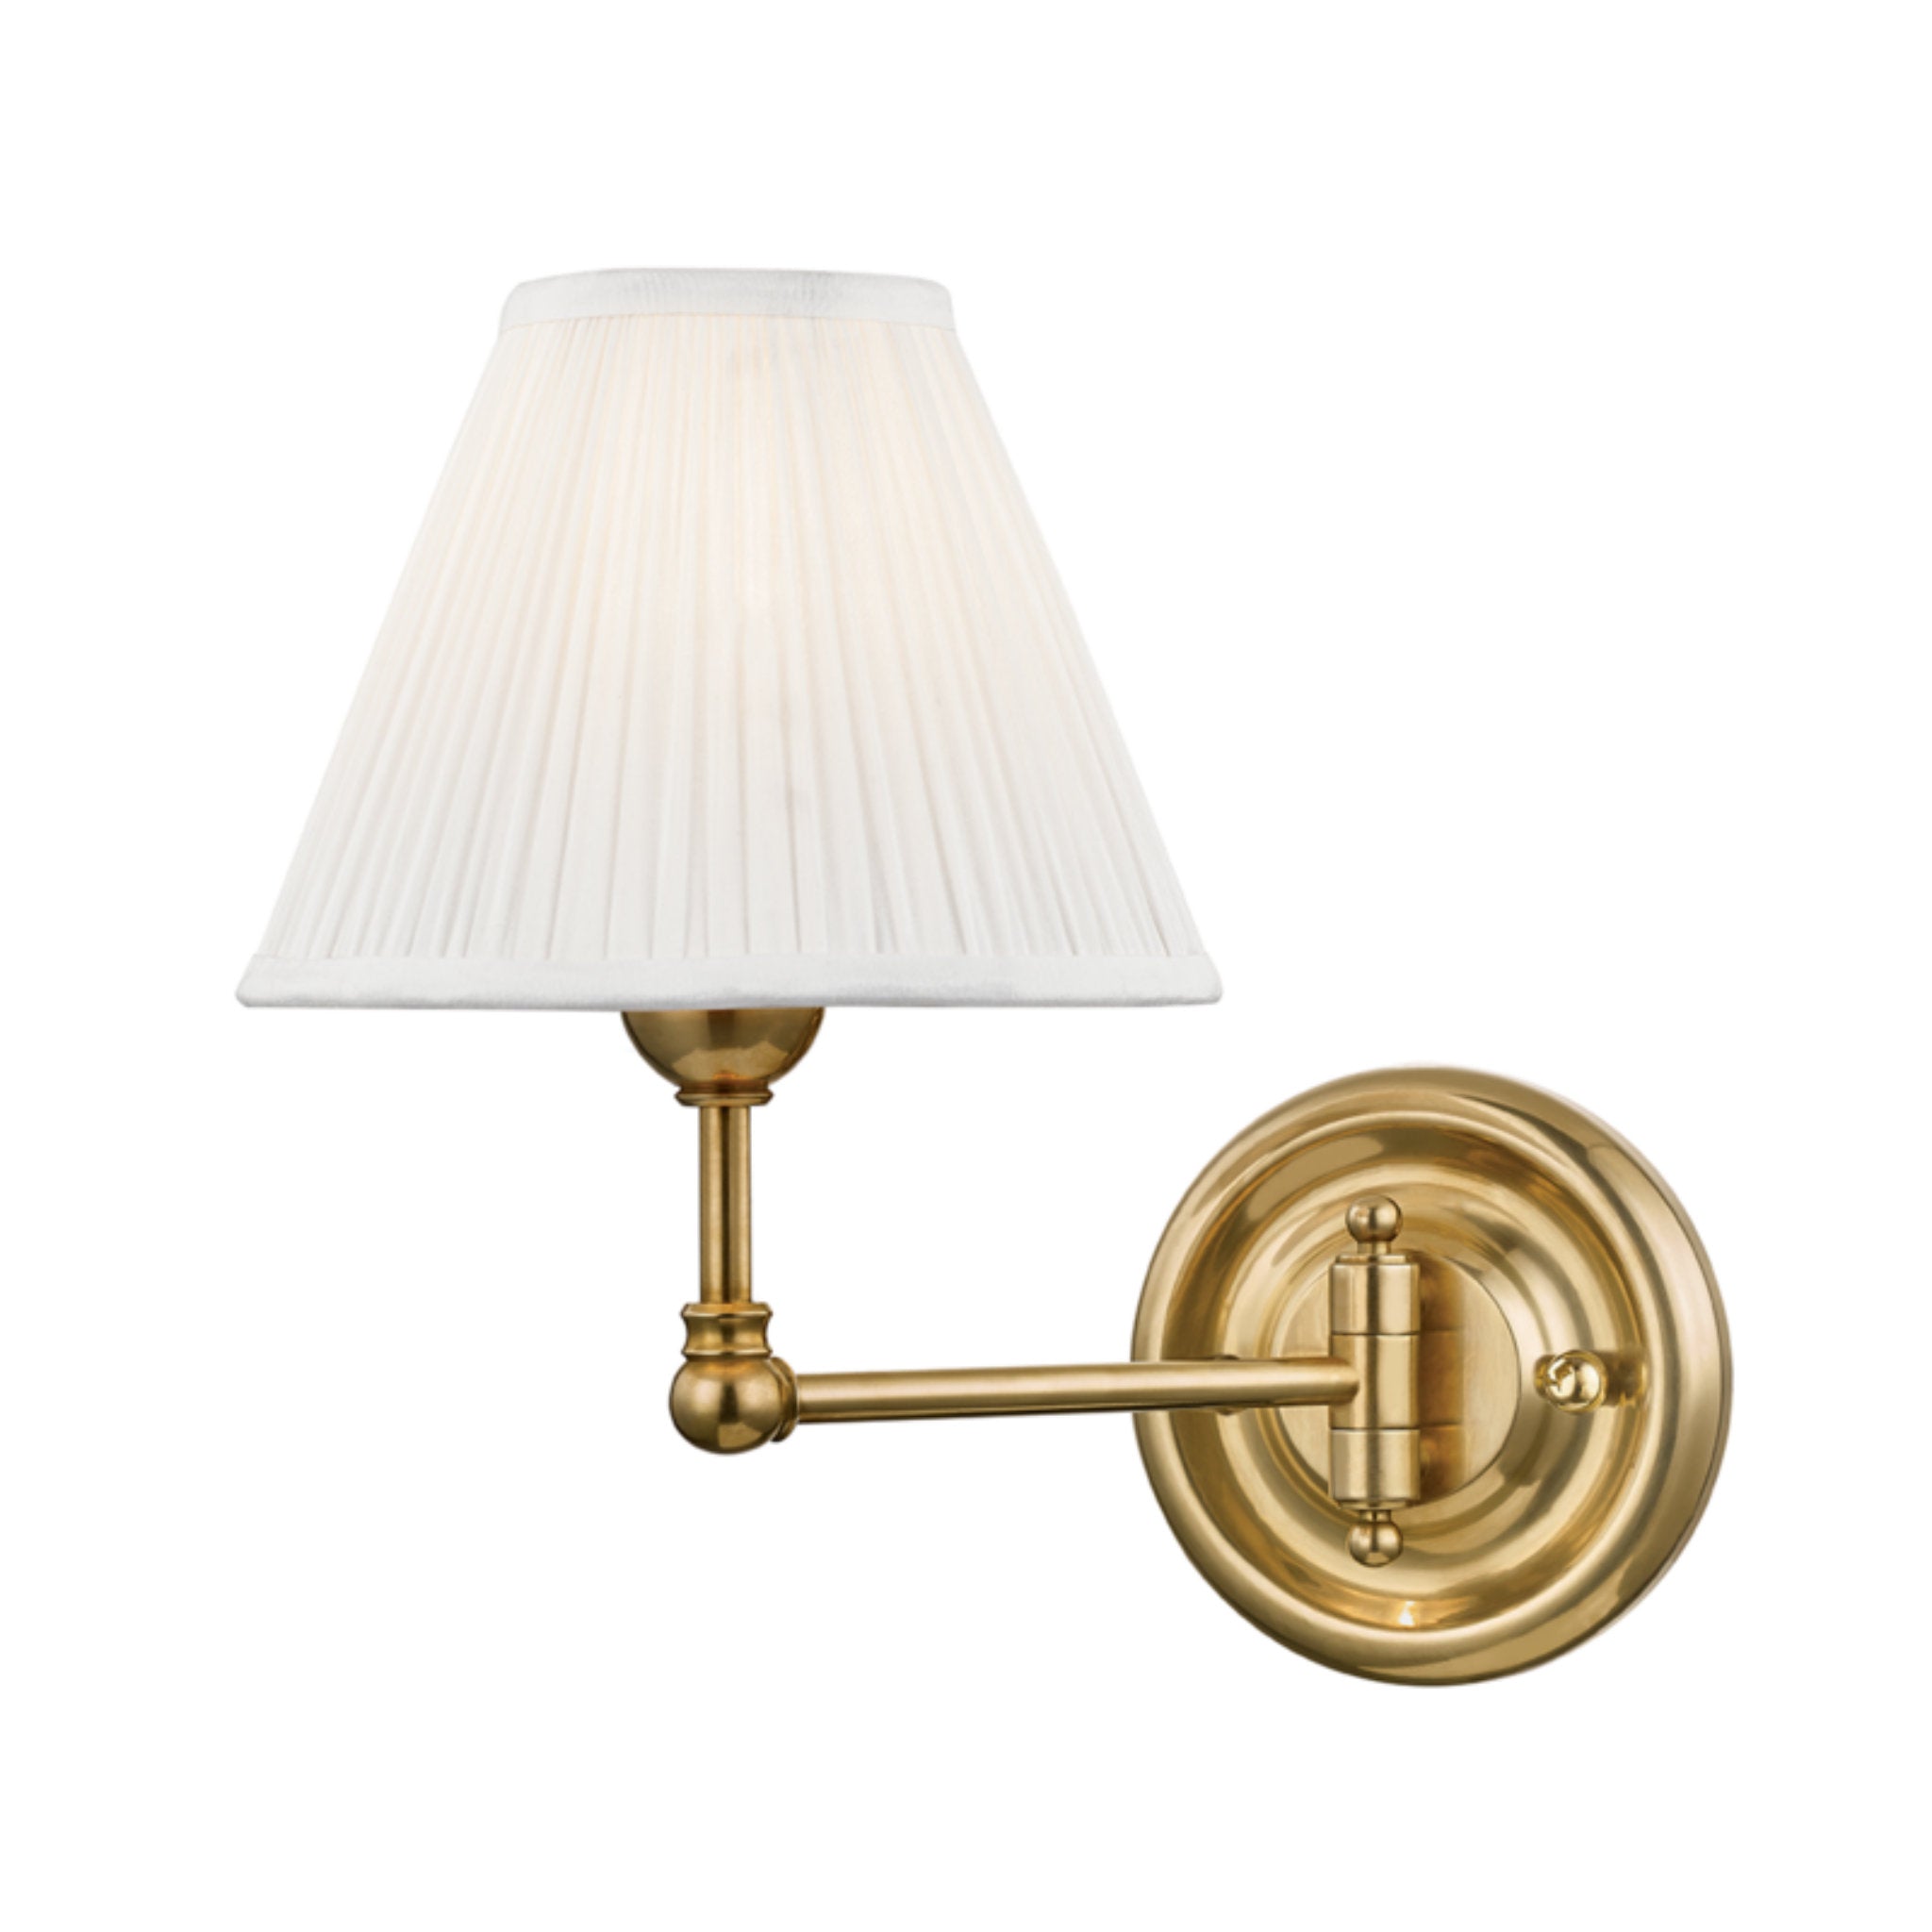 Classic No.1 1 Light Wall Sconce in Aged Brass by Mark D. Sikes